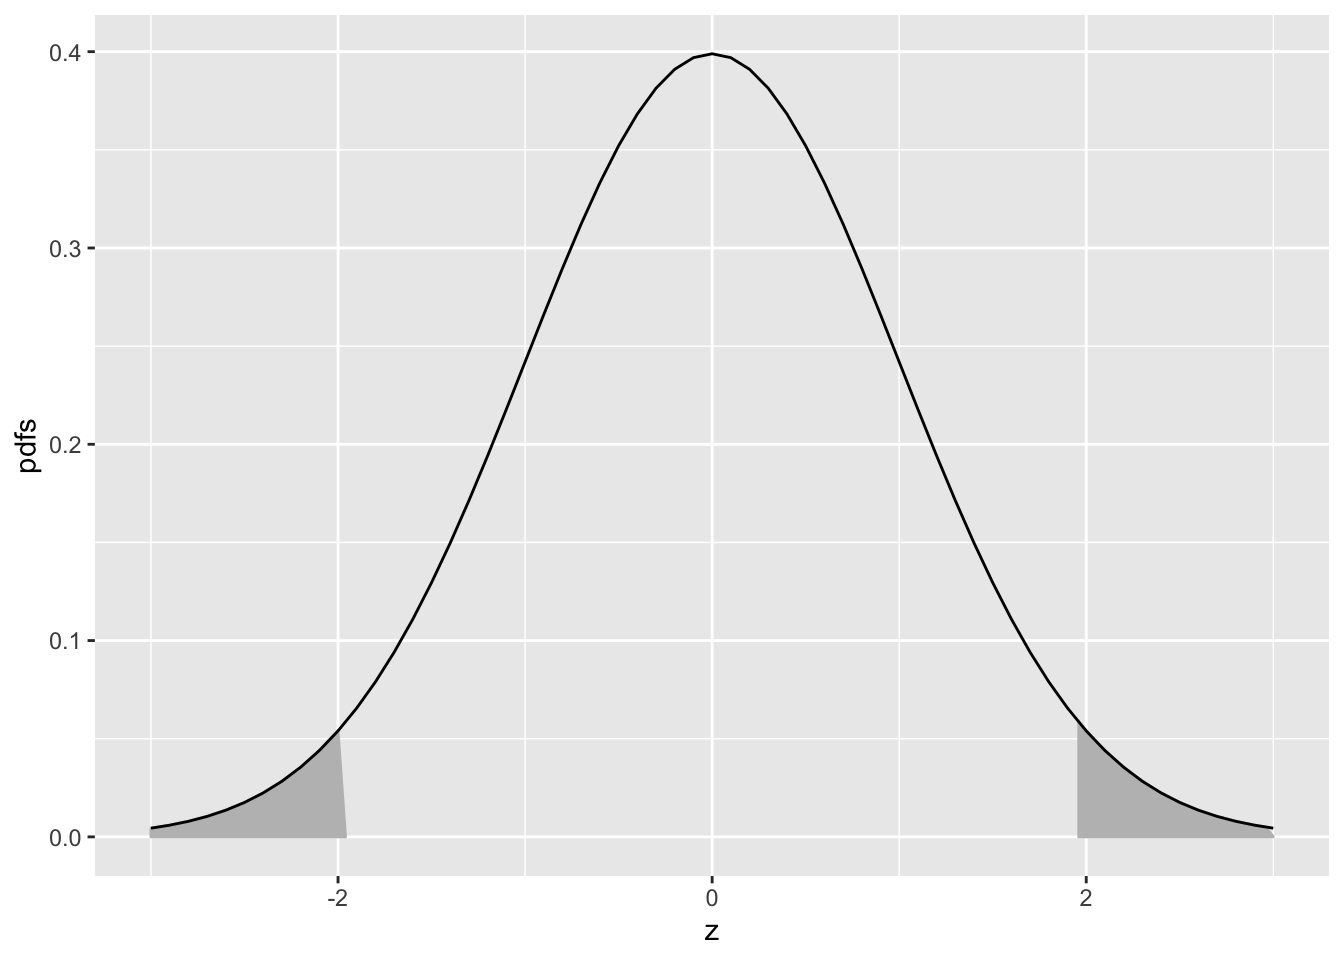 Illustrating that 95 percent of the total area under the unit normal pdf is contained in the range |Z| < 1.96, which can be used to construct a 95 percent confidence interval for an estimate of a suitably normalized statistic. The area in each shaded tail is 0.025.